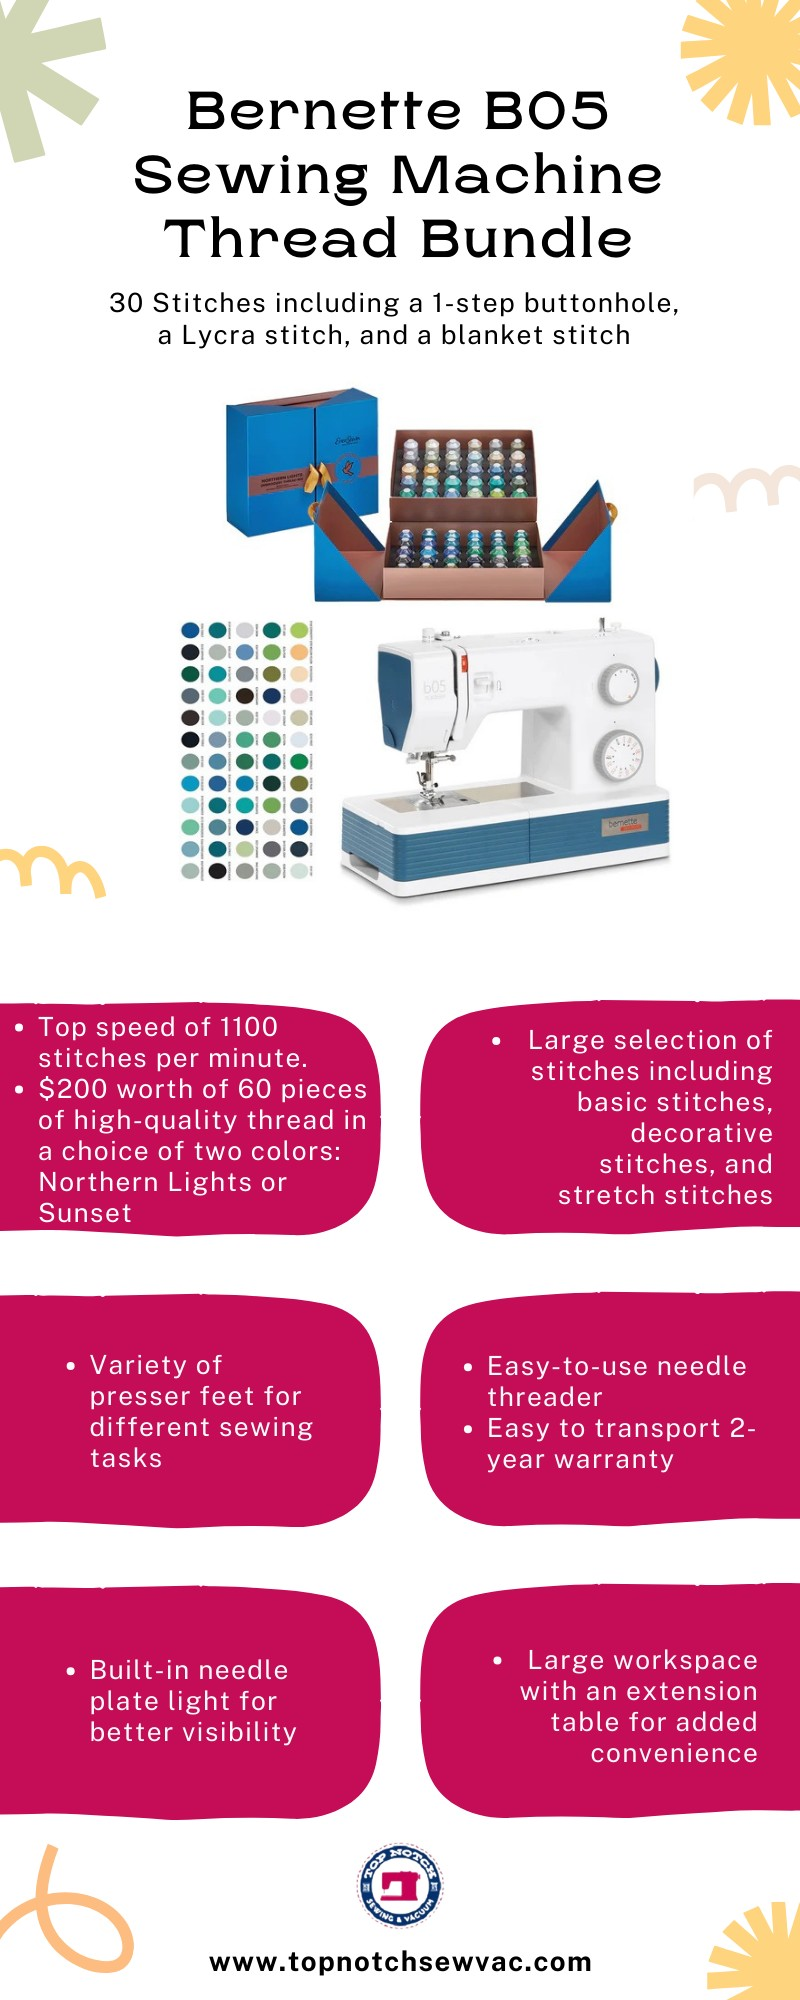 Sew with Precision: The Bernette B05 Sewing Machine Thread Bundle!